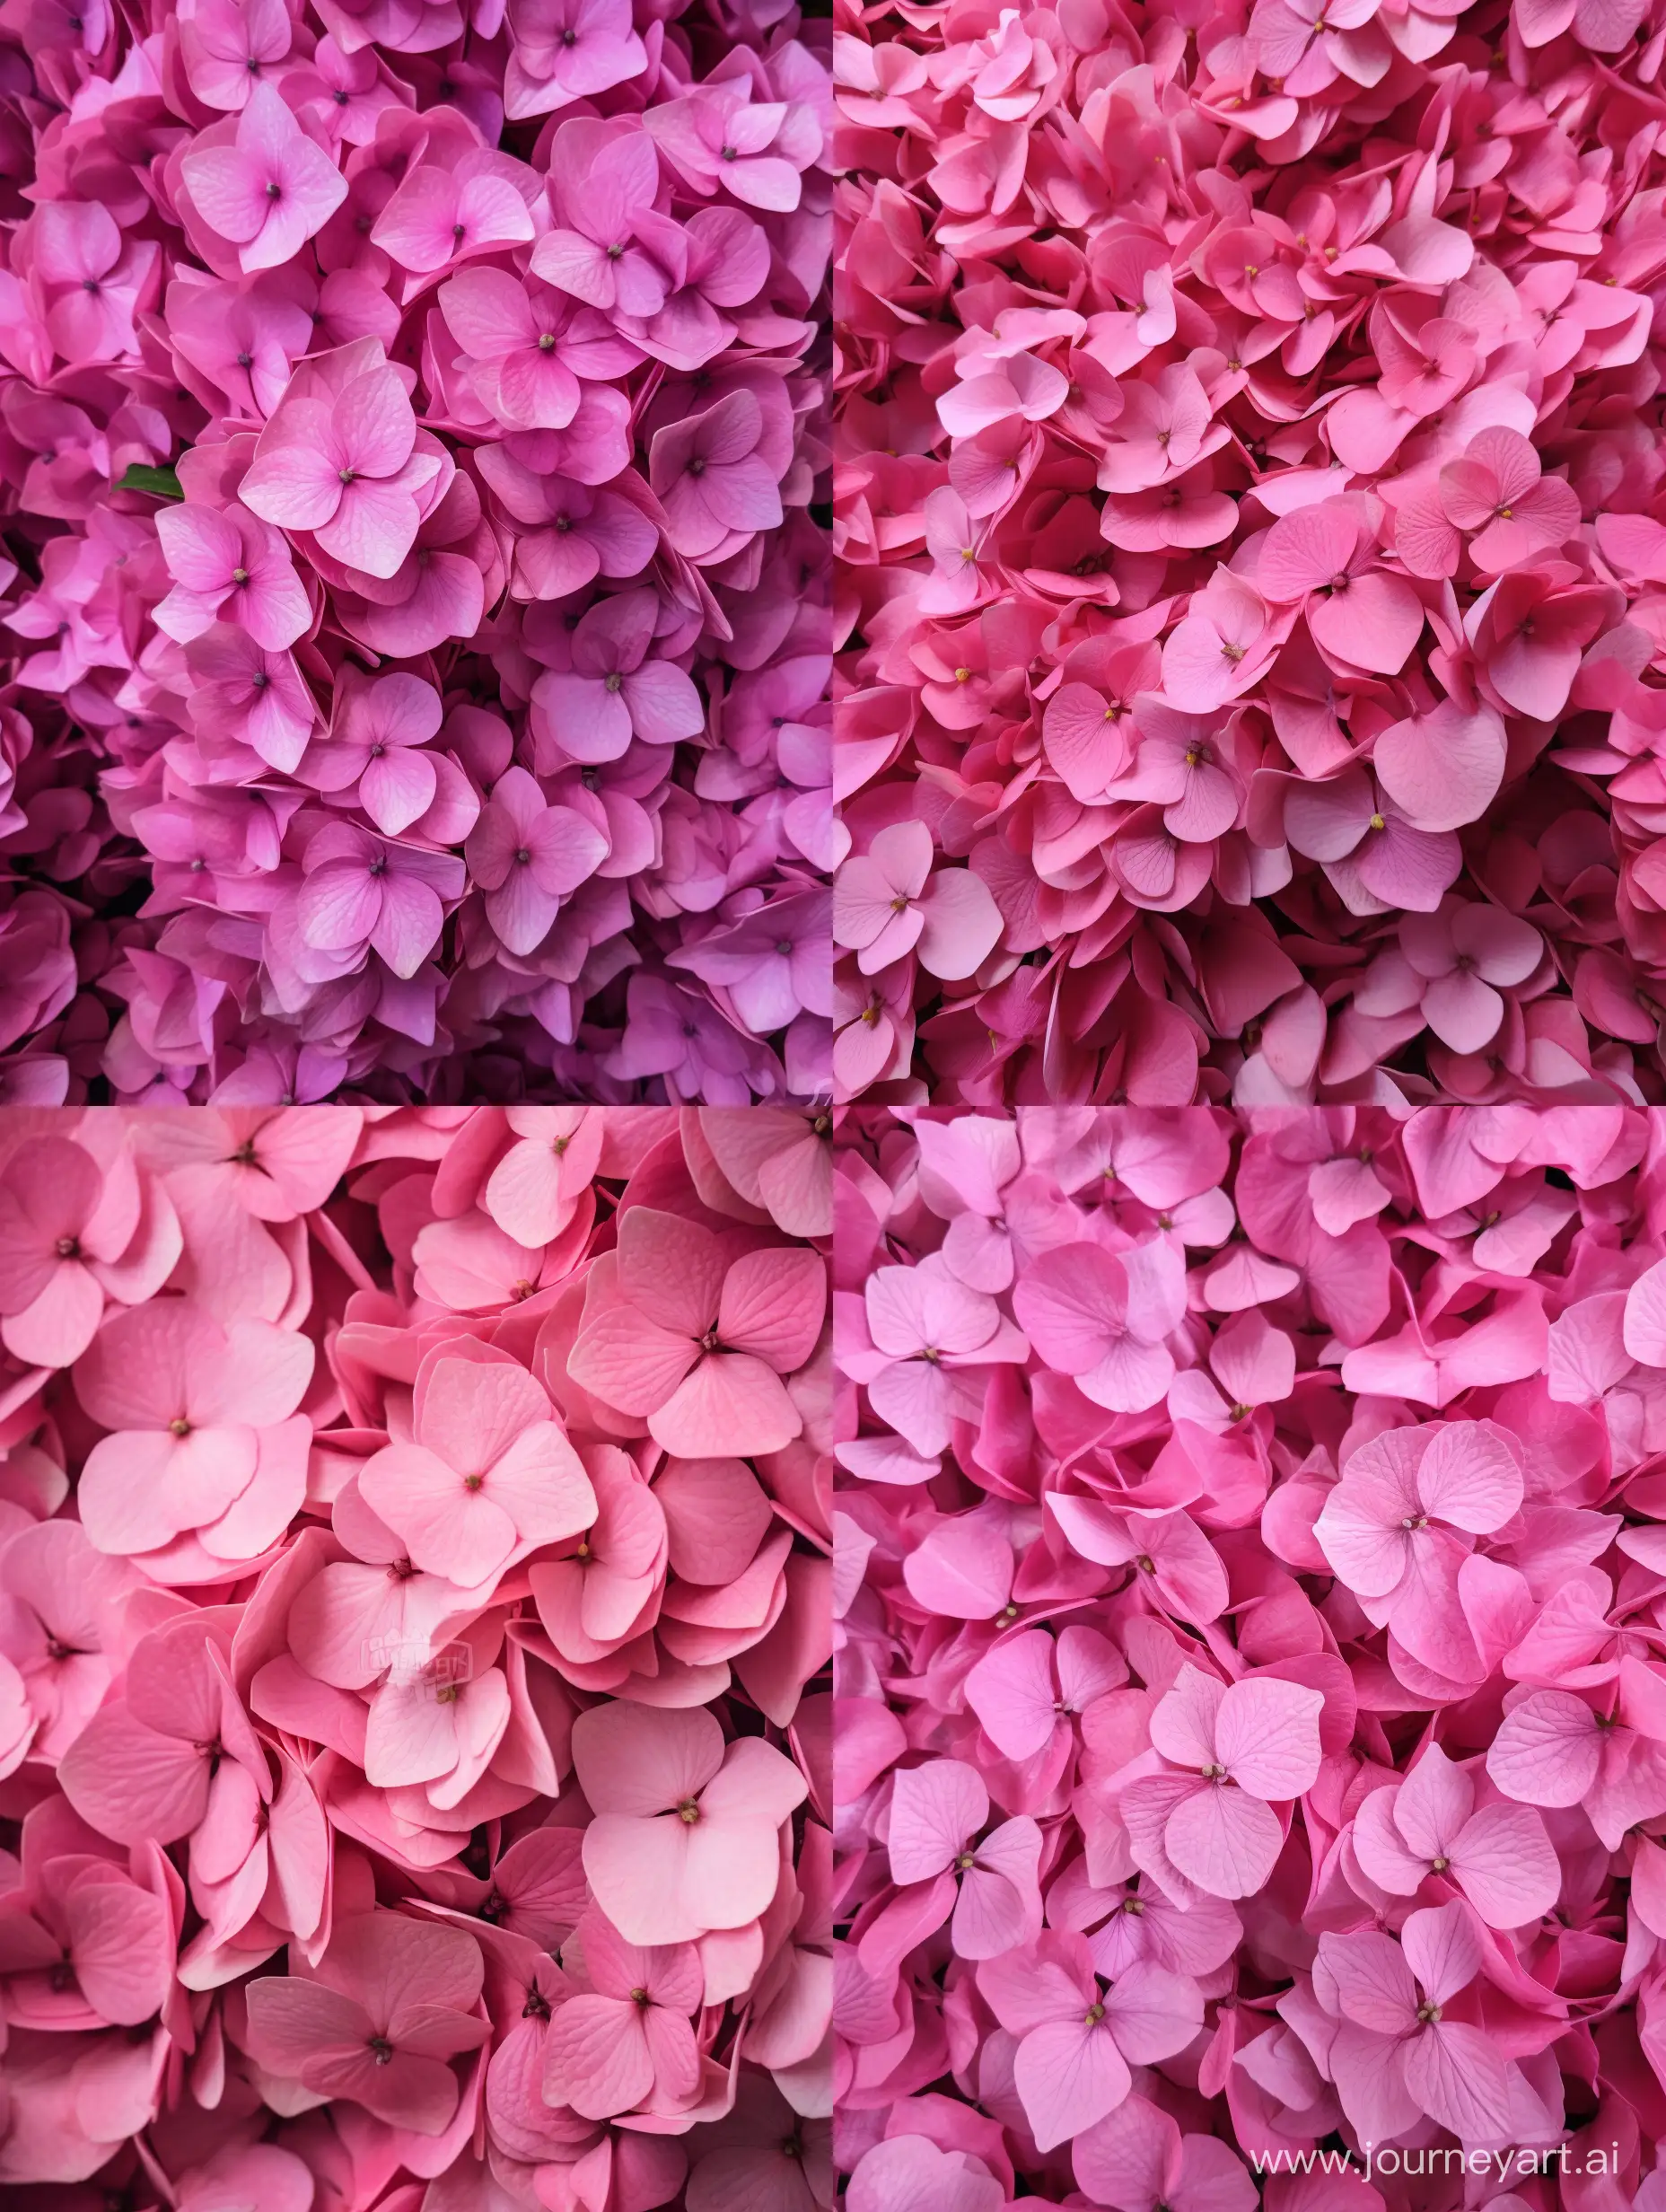 Exquisite-Pink-Hydrangea-Wallpaper-HighQuality-Realism-with-Detailed-Petals